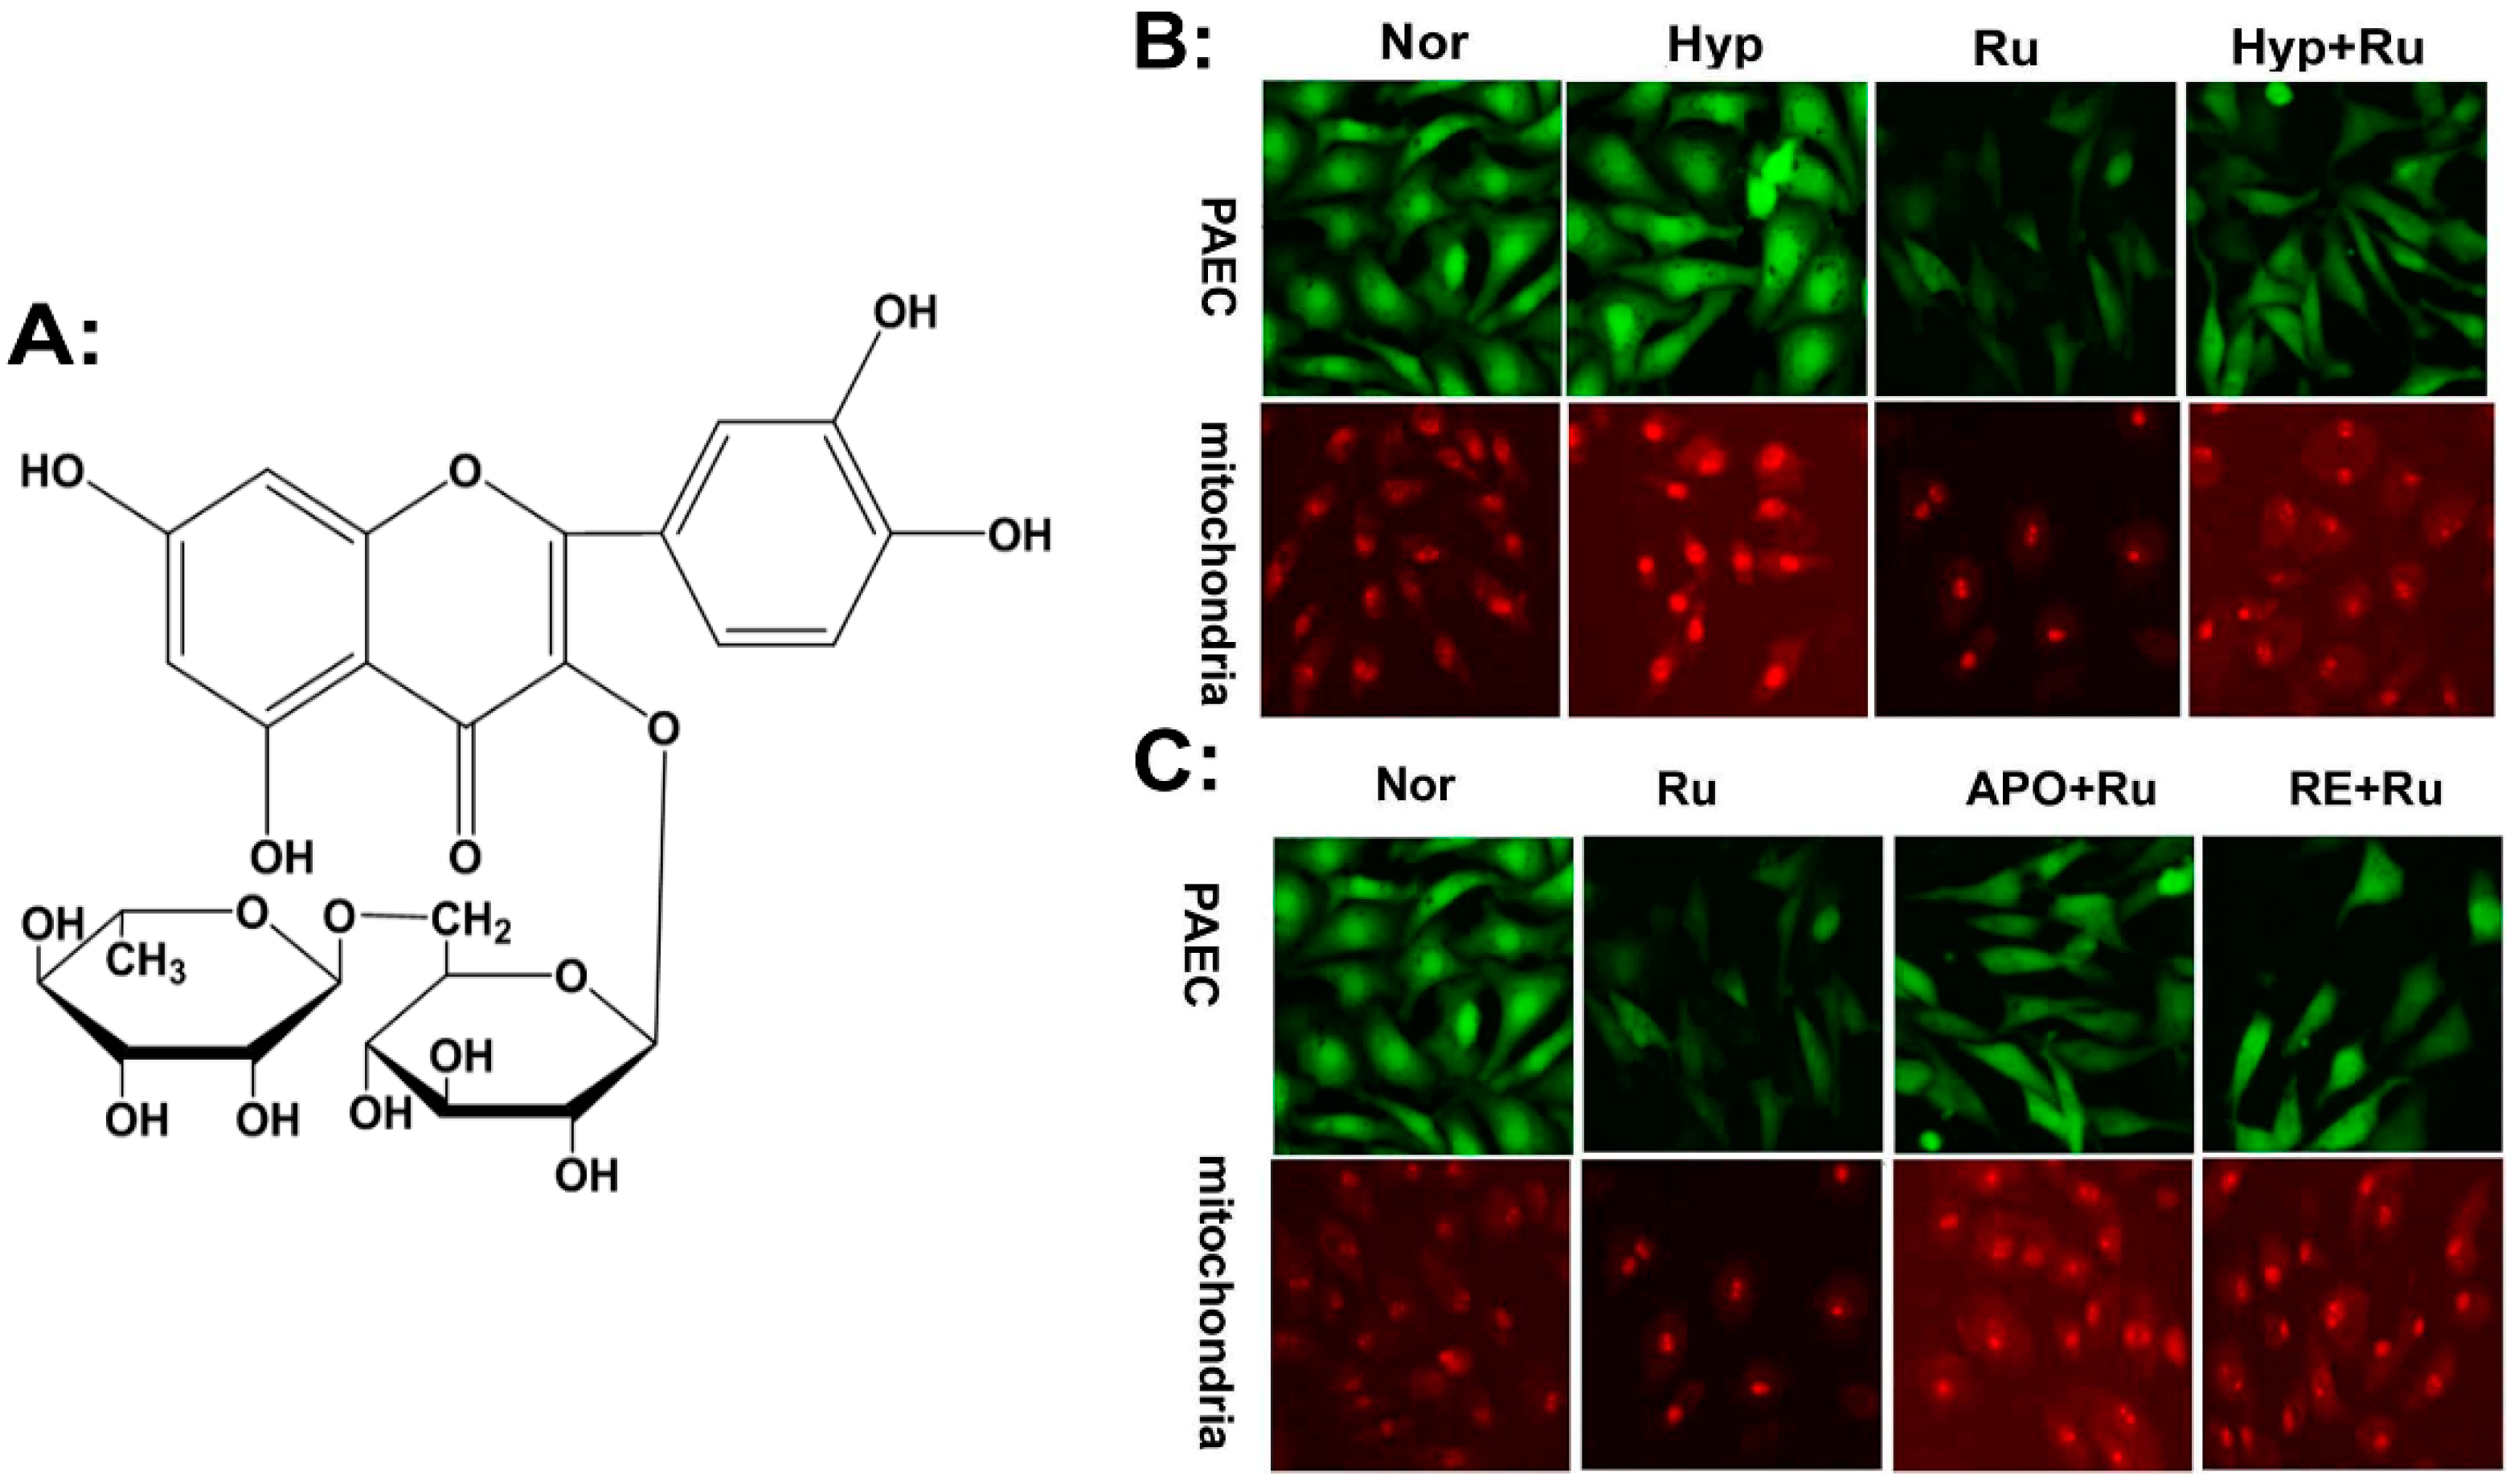 Molecules Free Full Text Antioxidant Mechanism Of Rutin On Hypoxia Induced Pulmonary Arterial Cell Proliferation